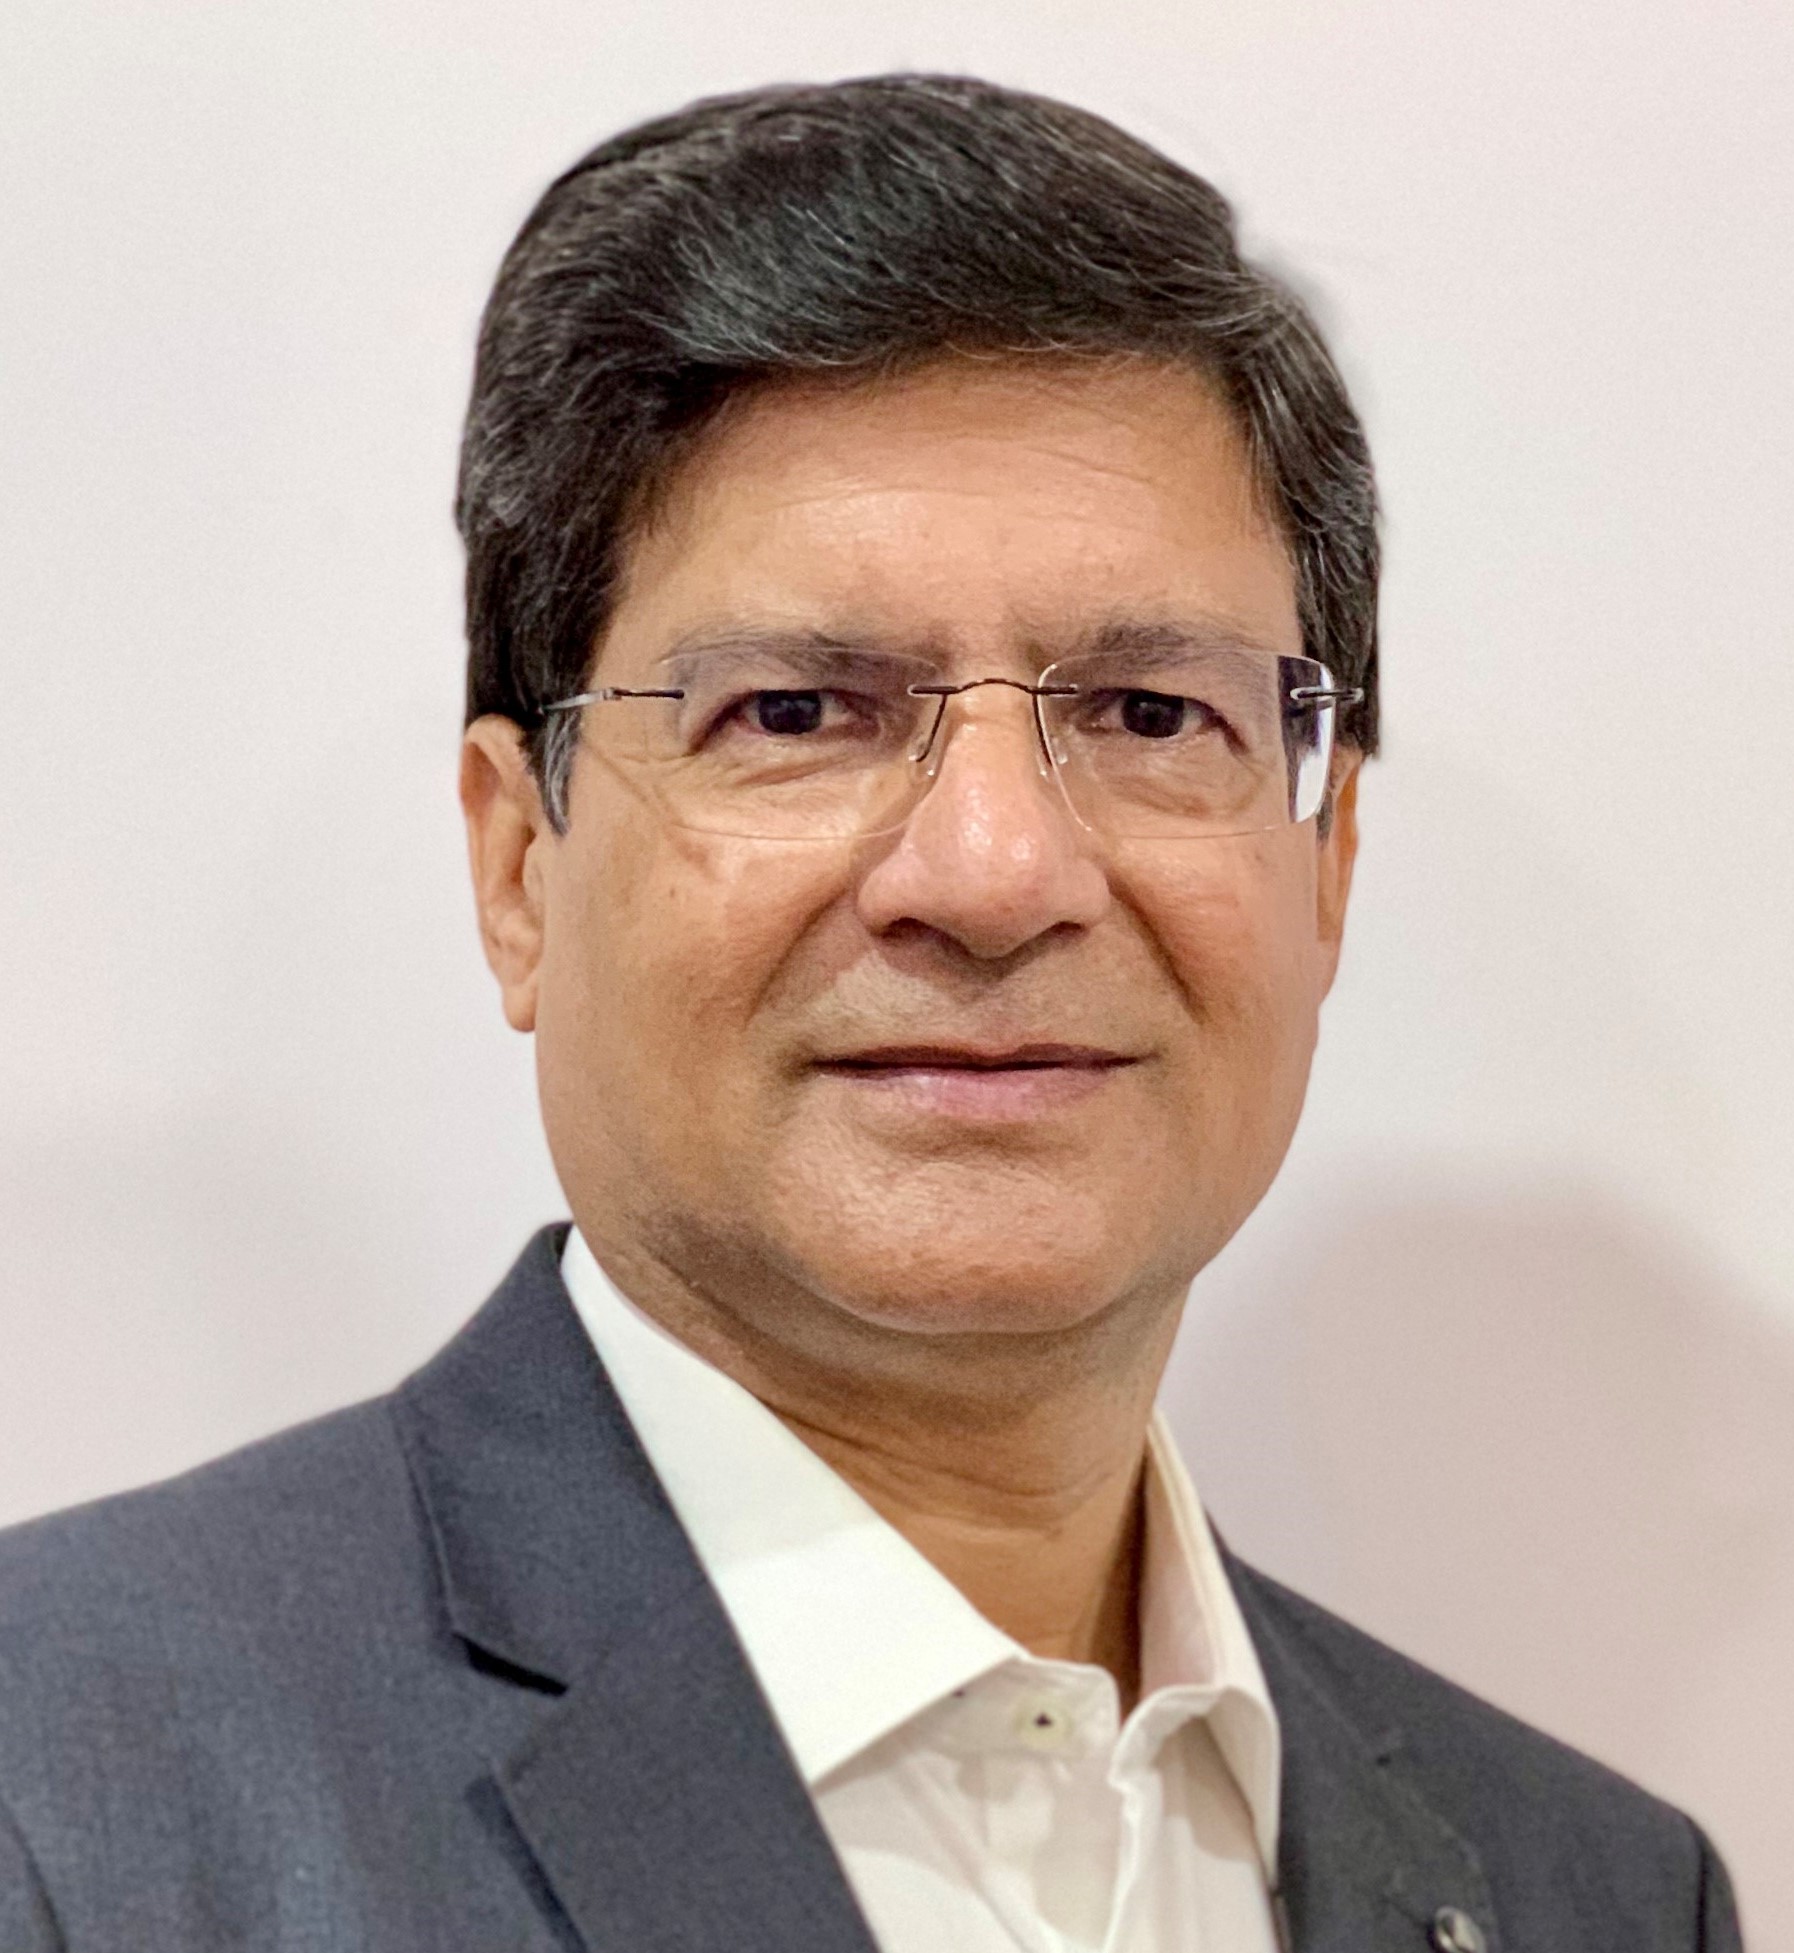 AmpIn Energy Transition appoints Mr. Amit Kumar Mittal as COO-C&I Business to strengthen its management team – EQ